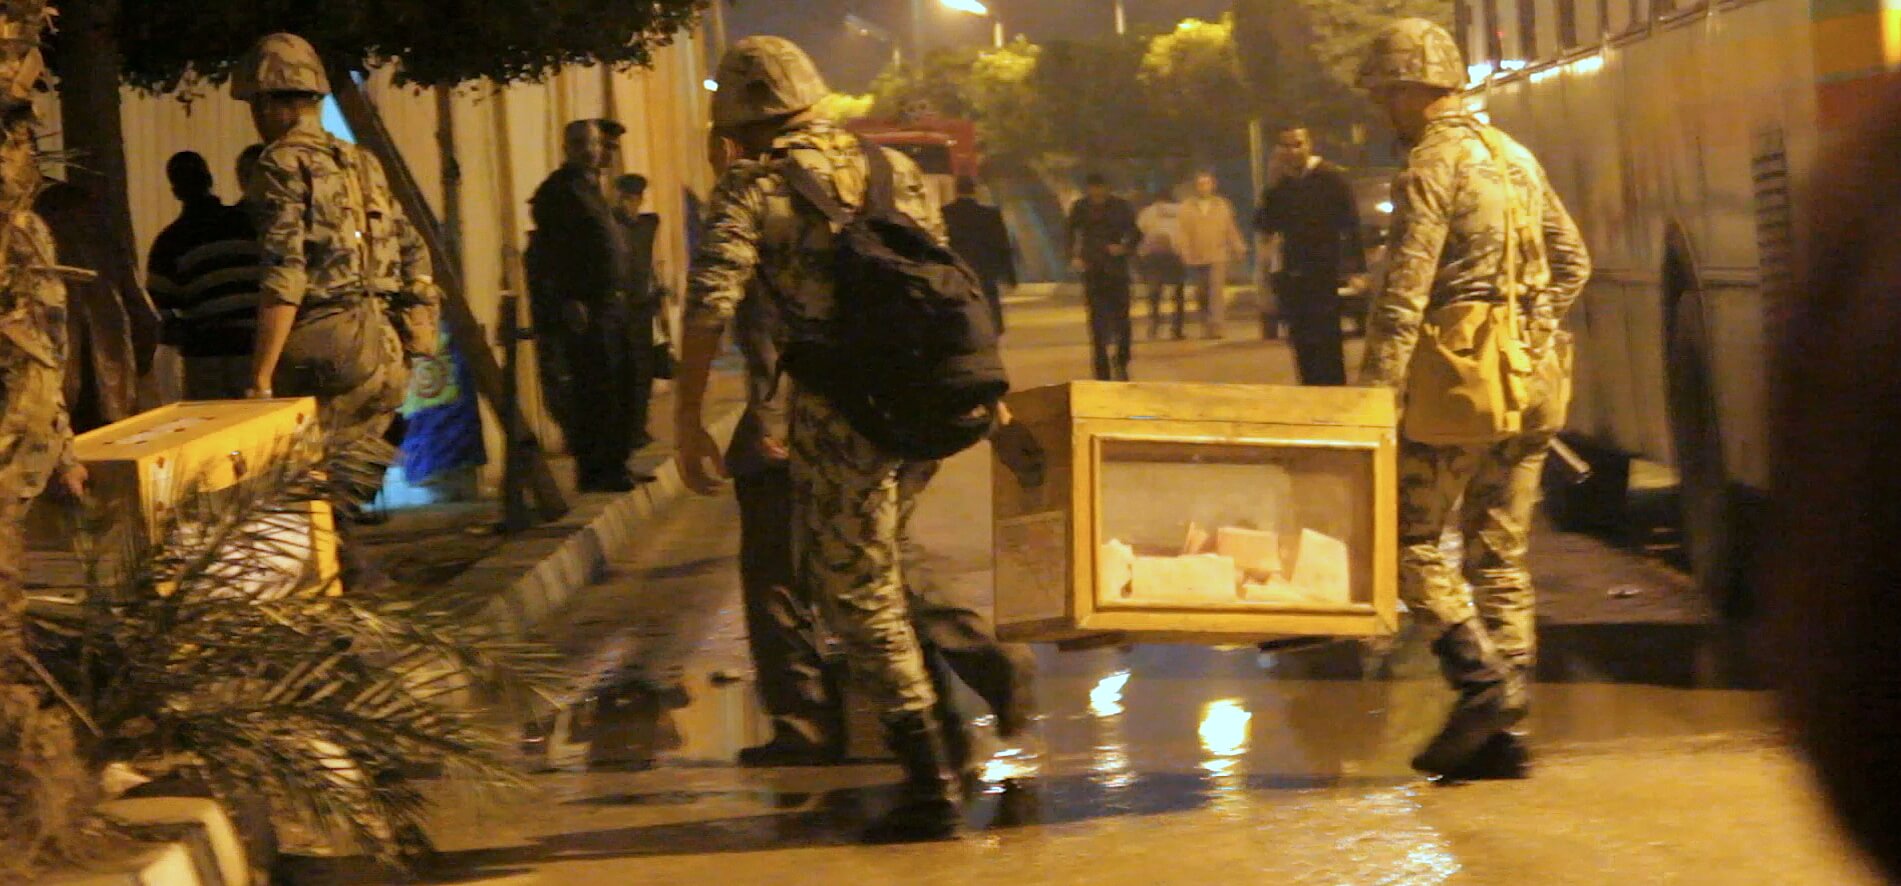 Still from The Vote. People in the street watch as soldiers carry boxes with votes inside of them.